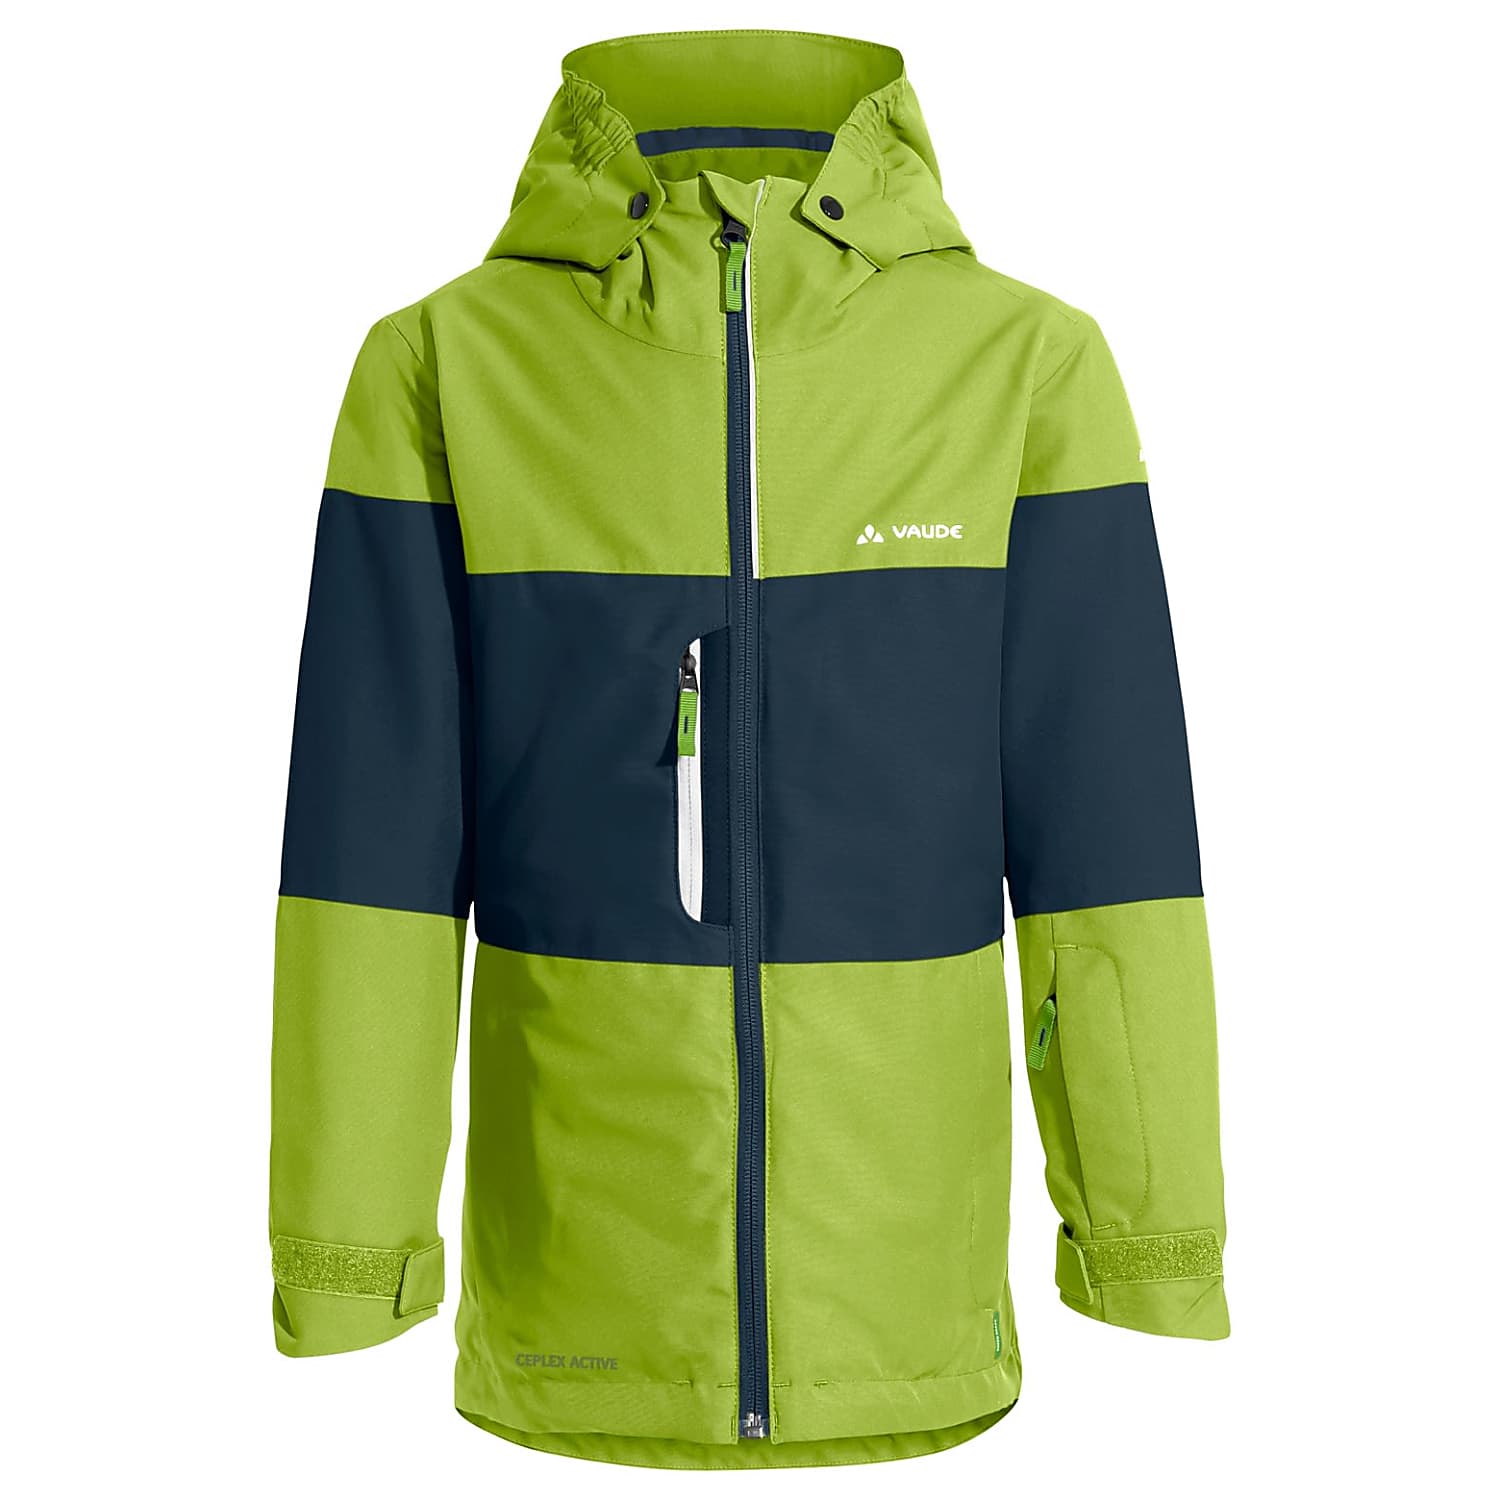 SNOW KIDS cheap CUP Vaude JACKET, shipping Chute Green and - Fast